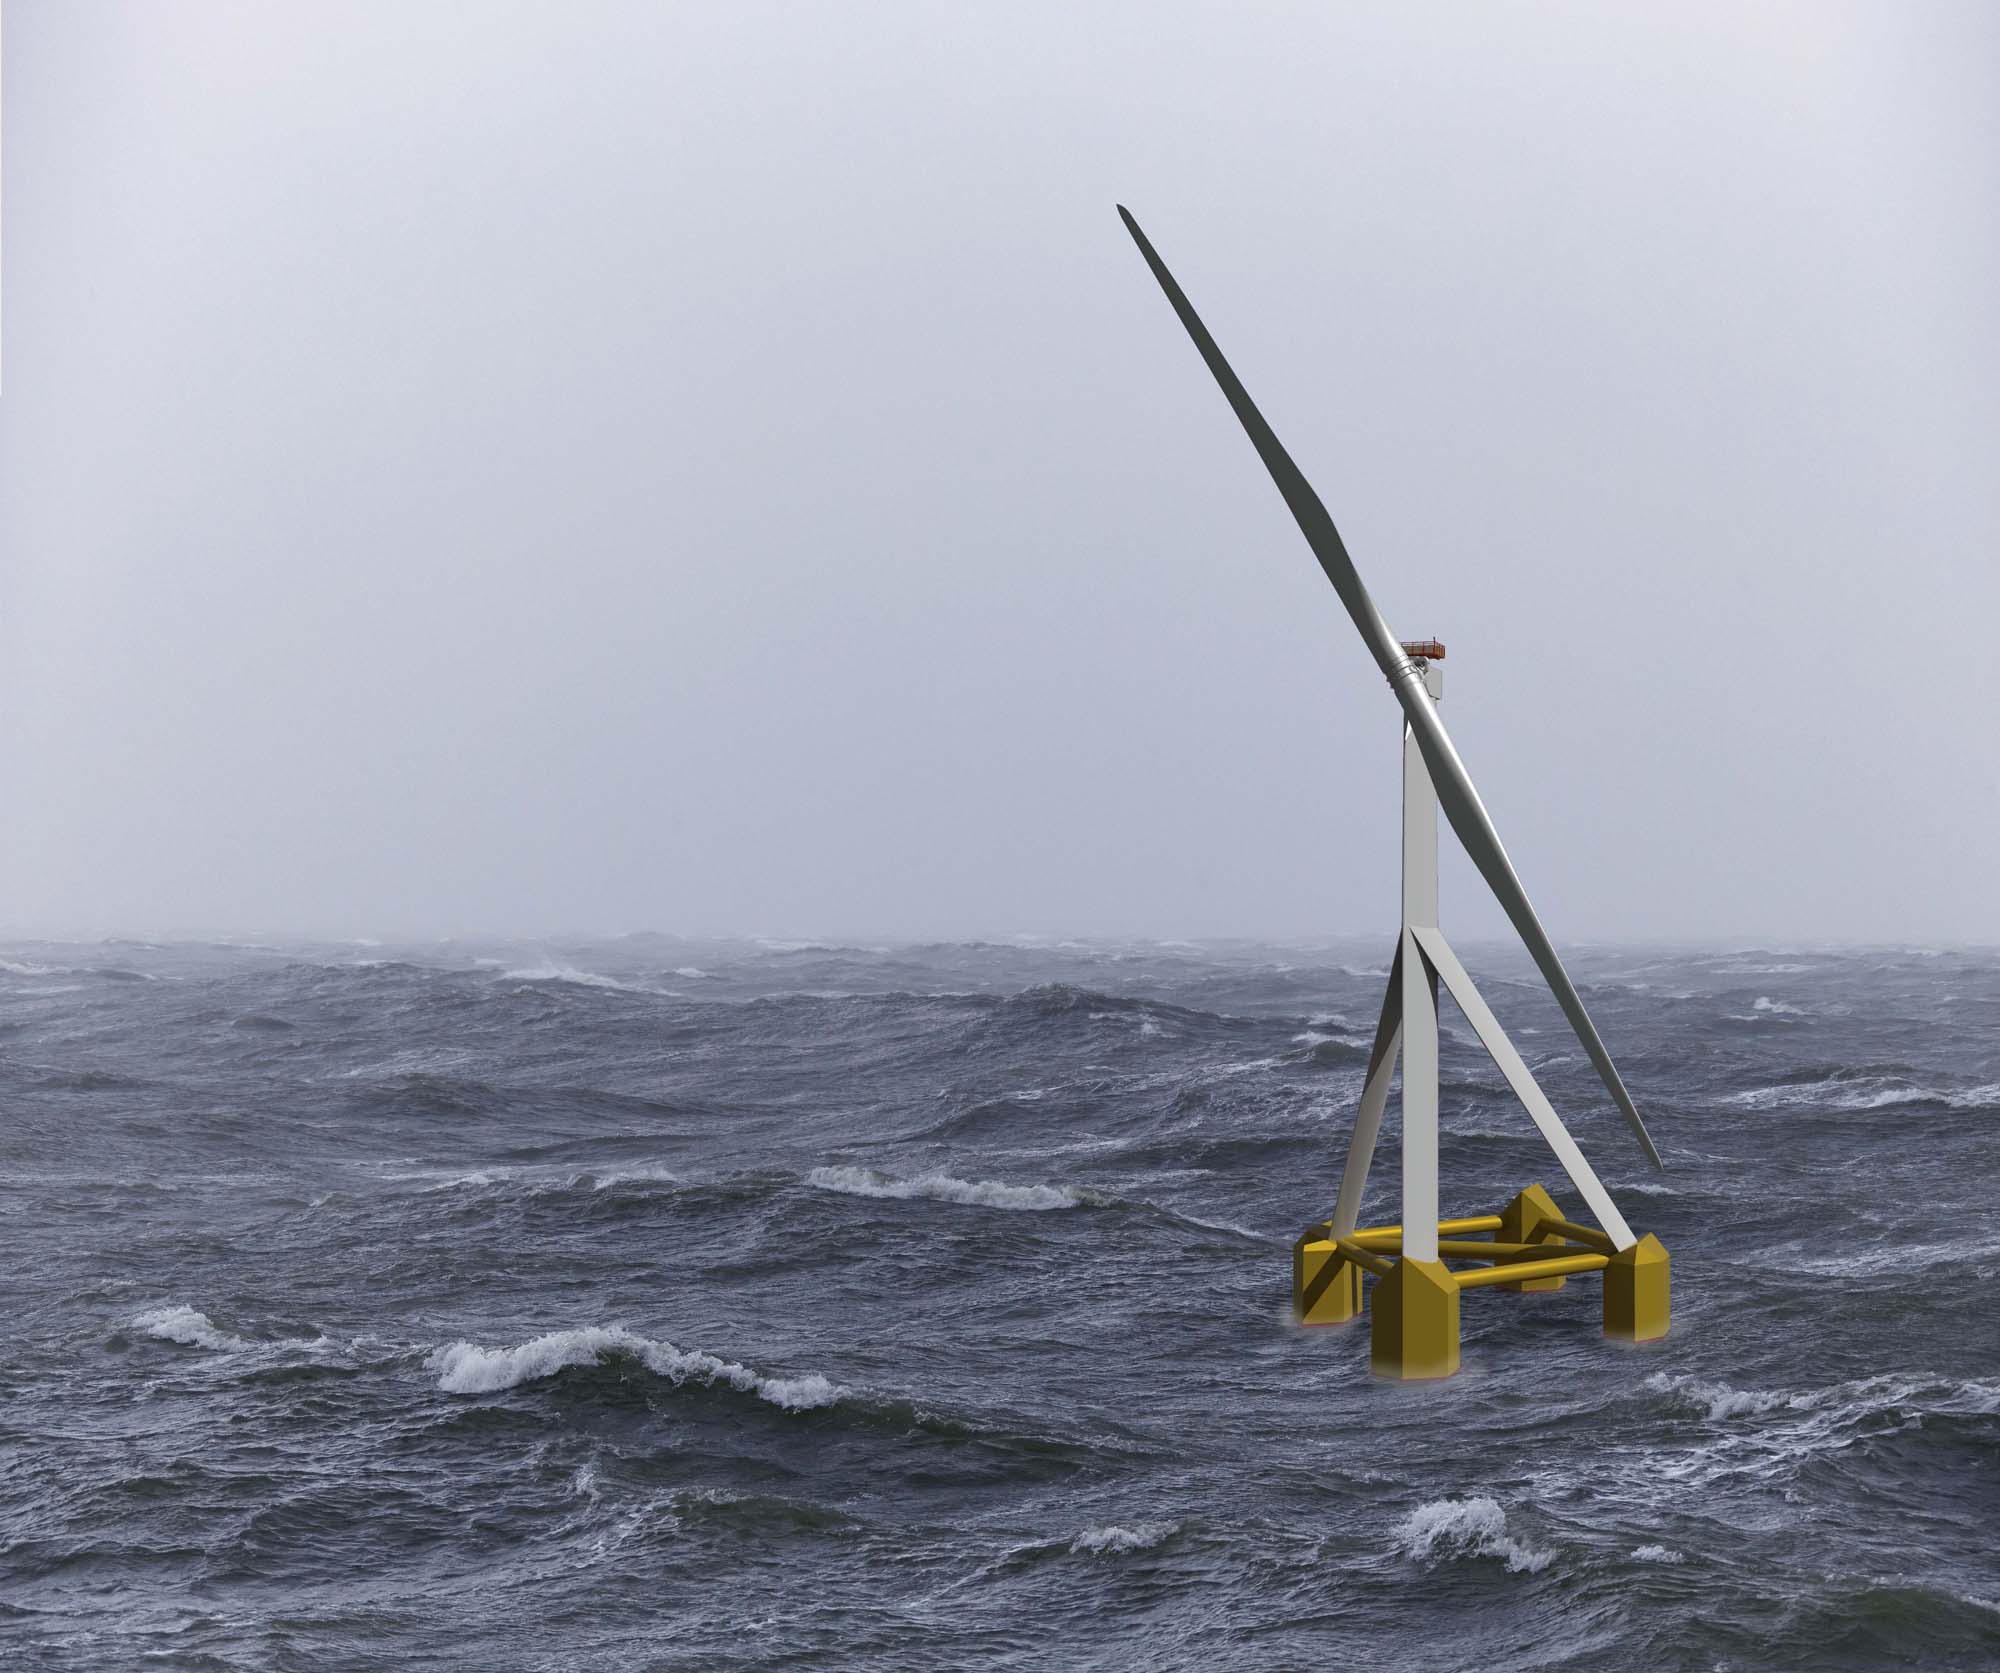 An image rendering a two-blade floating wind turbine at sea